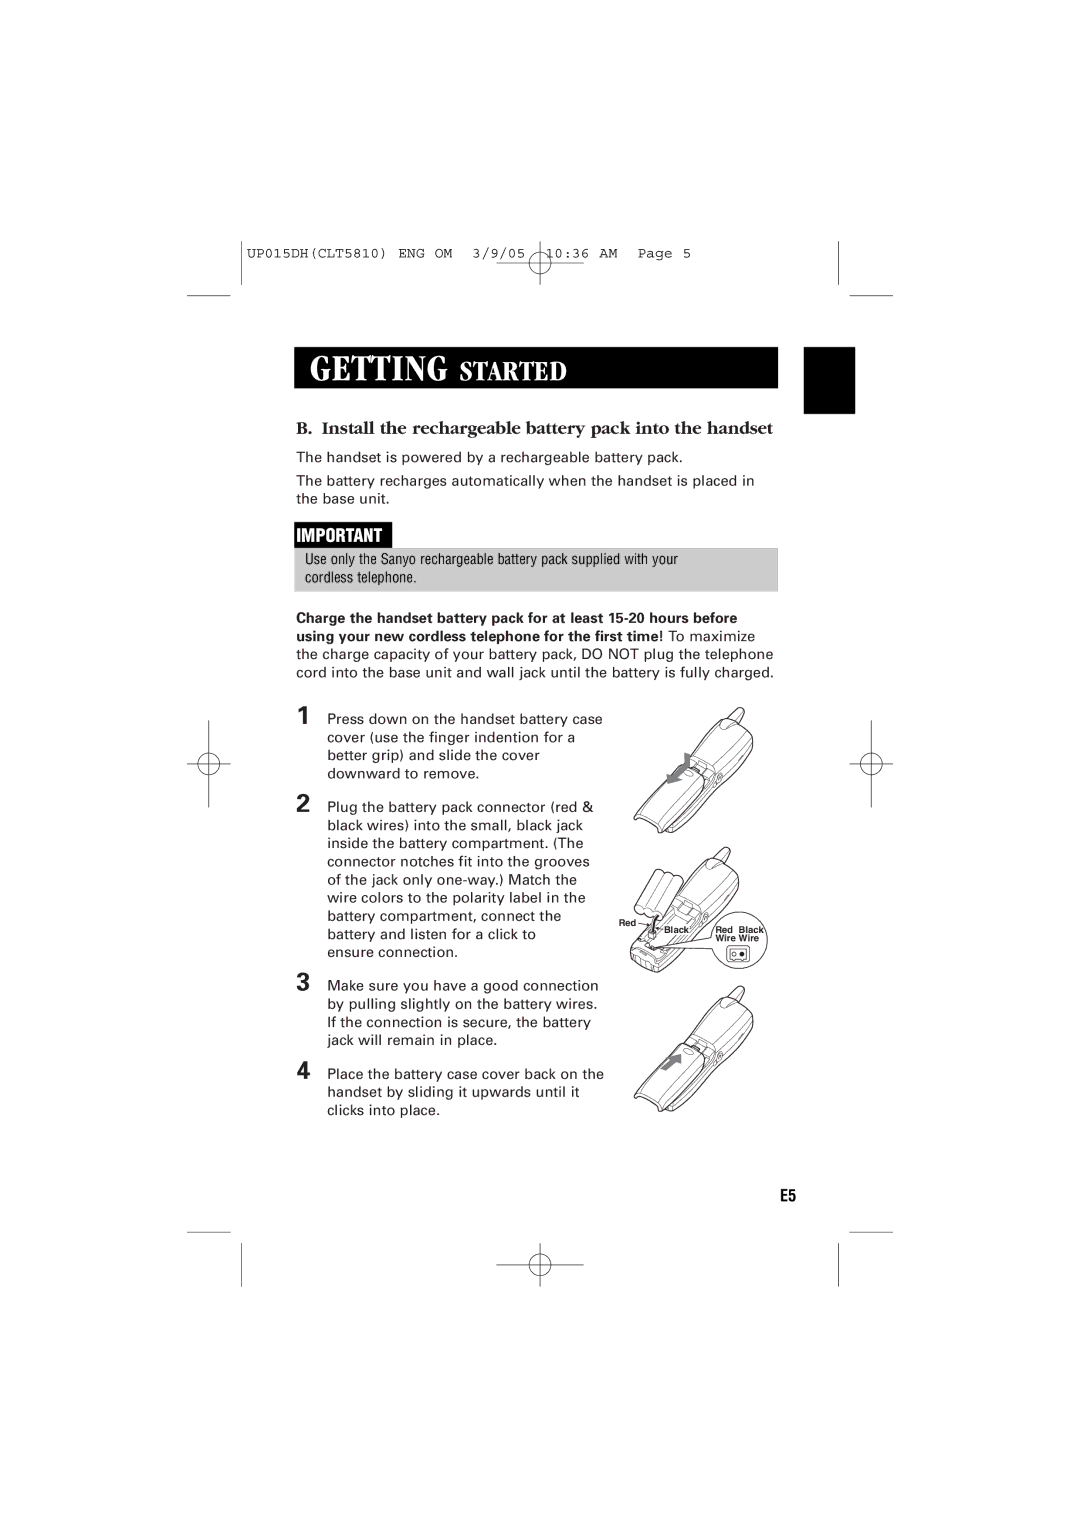 Sanyo CLT-5810 instruction manual Install the rechargeable battery pack into the handset 